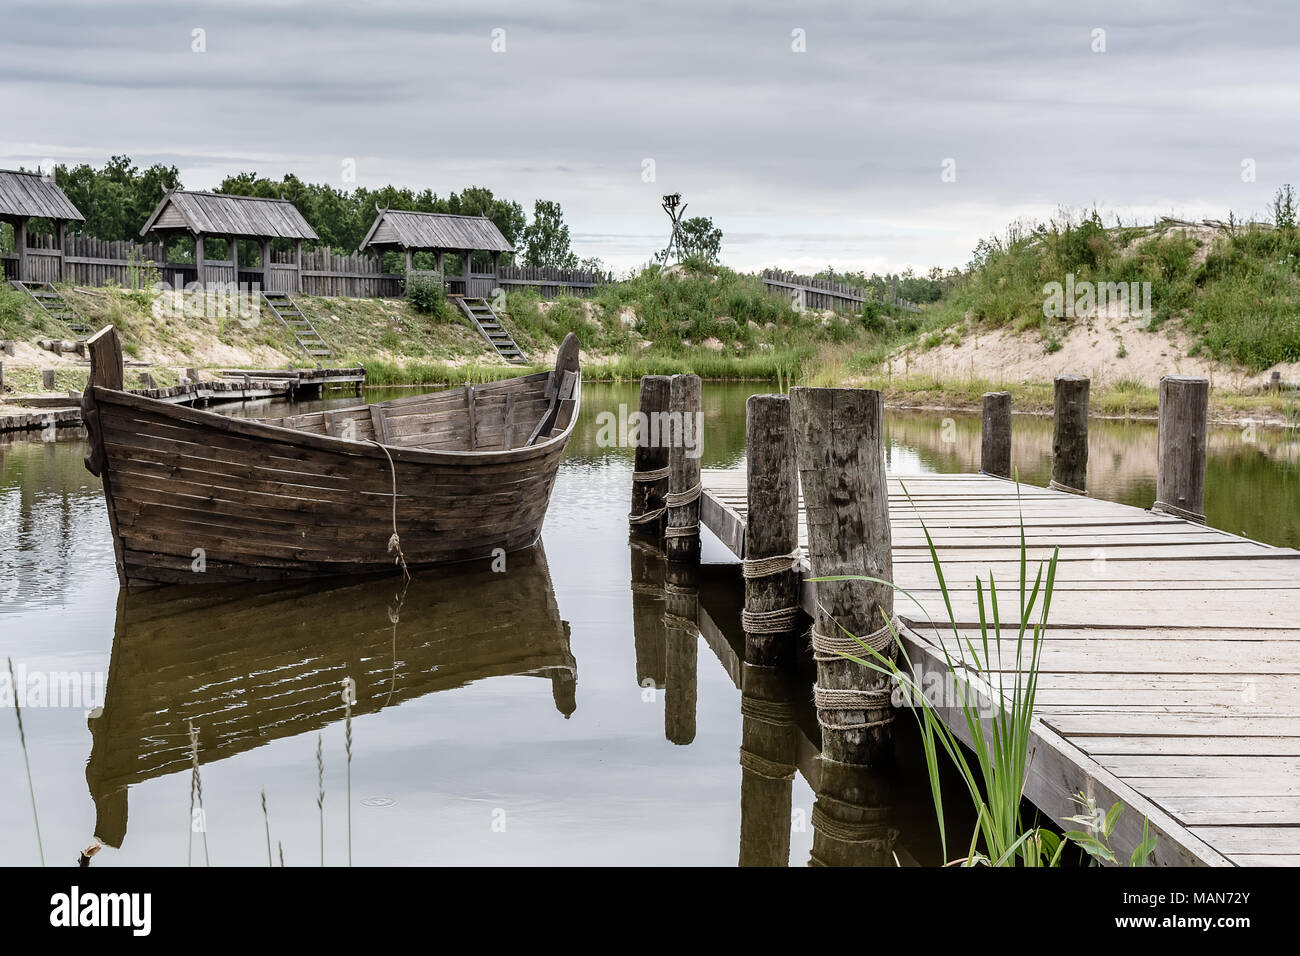 Tukums region, Latvia - July 8 2017: Medieval scenery near the lake with boat and wooden wall reflected in the water. Stock Photo